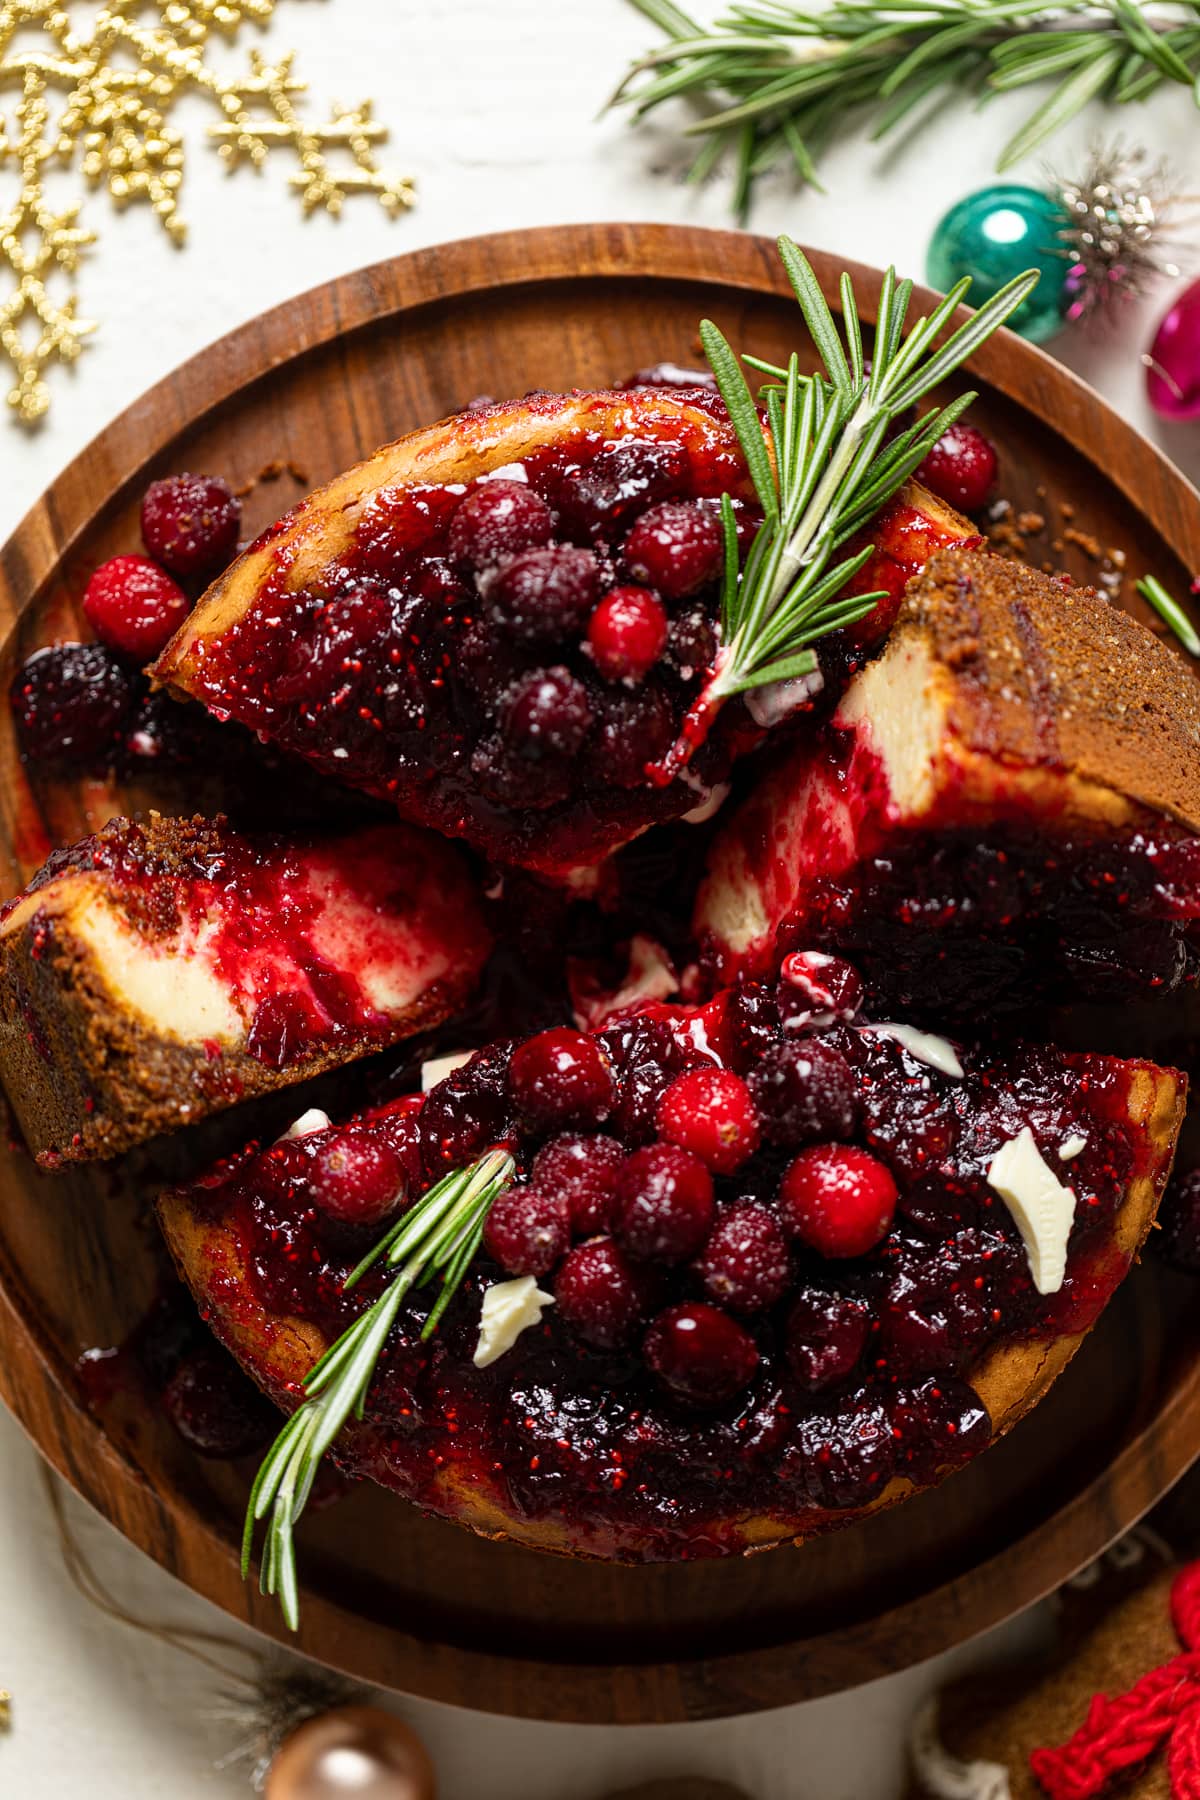 Partially-sliced White Chocolate Cheesecake with Cranberries